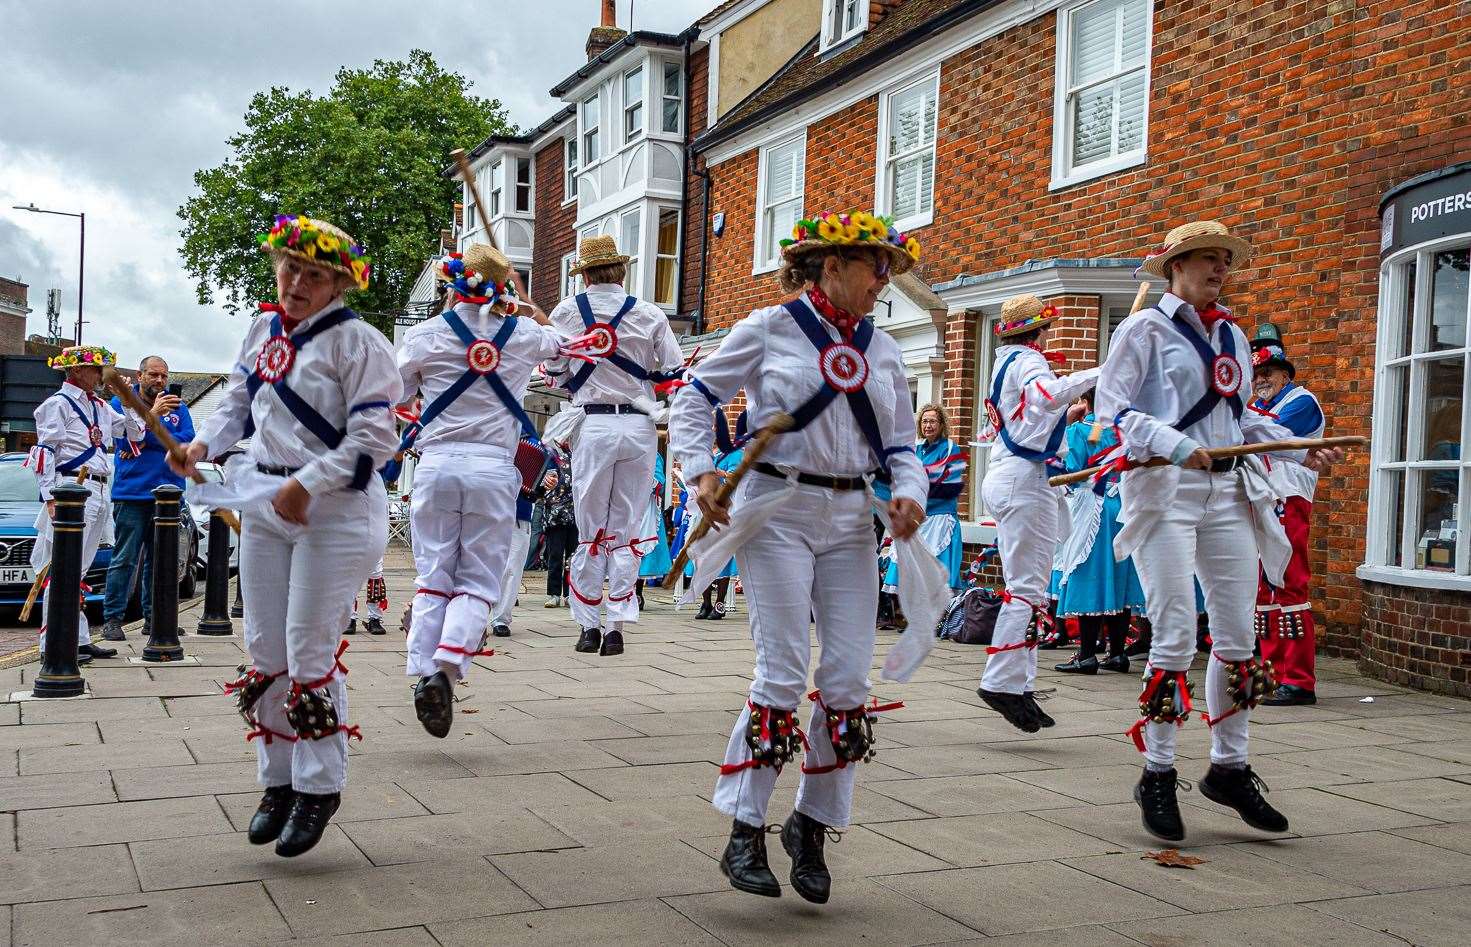 Morris dancers, folk musicians and traditional artisans will be at this year's Tenterden Folk Festival.  Photo: Philip L Hinton